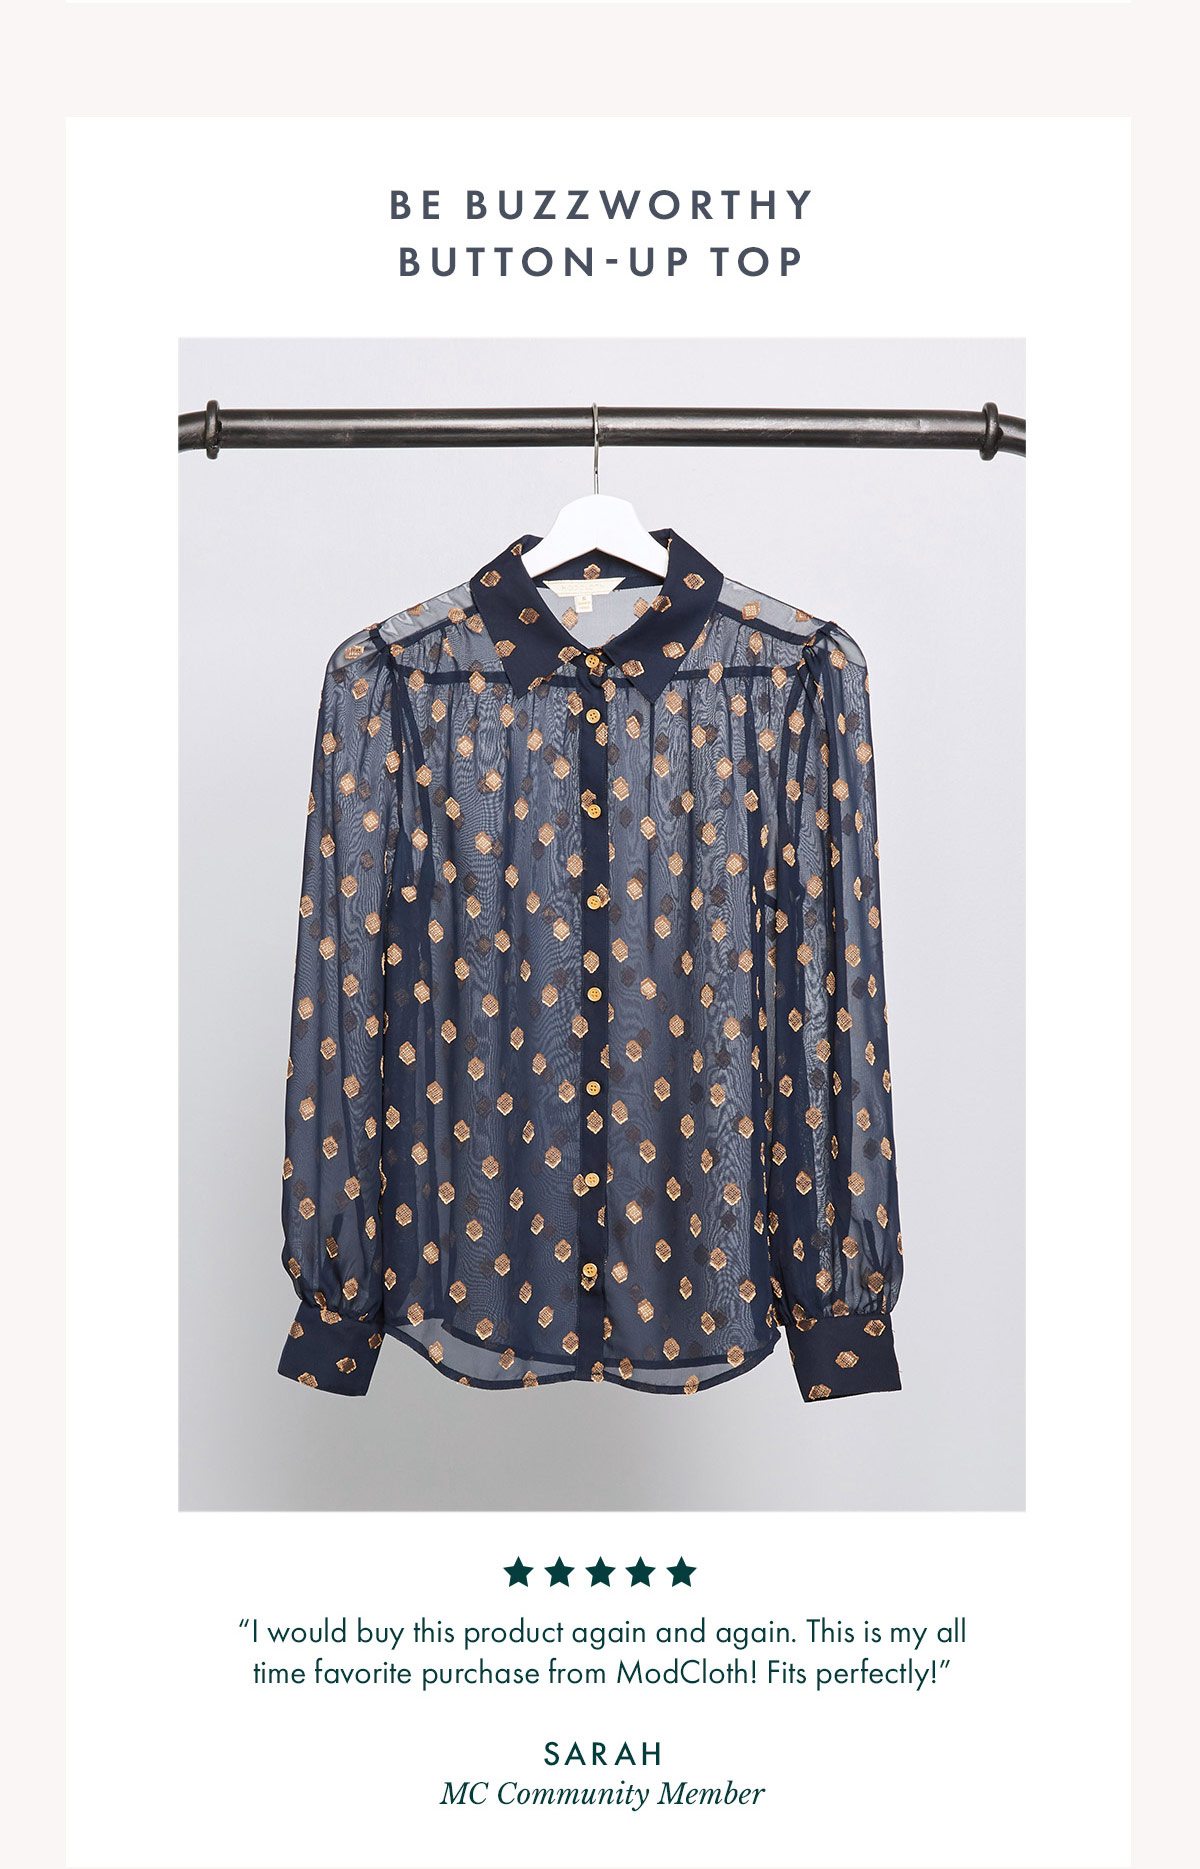 Be buzzworthy button-up top